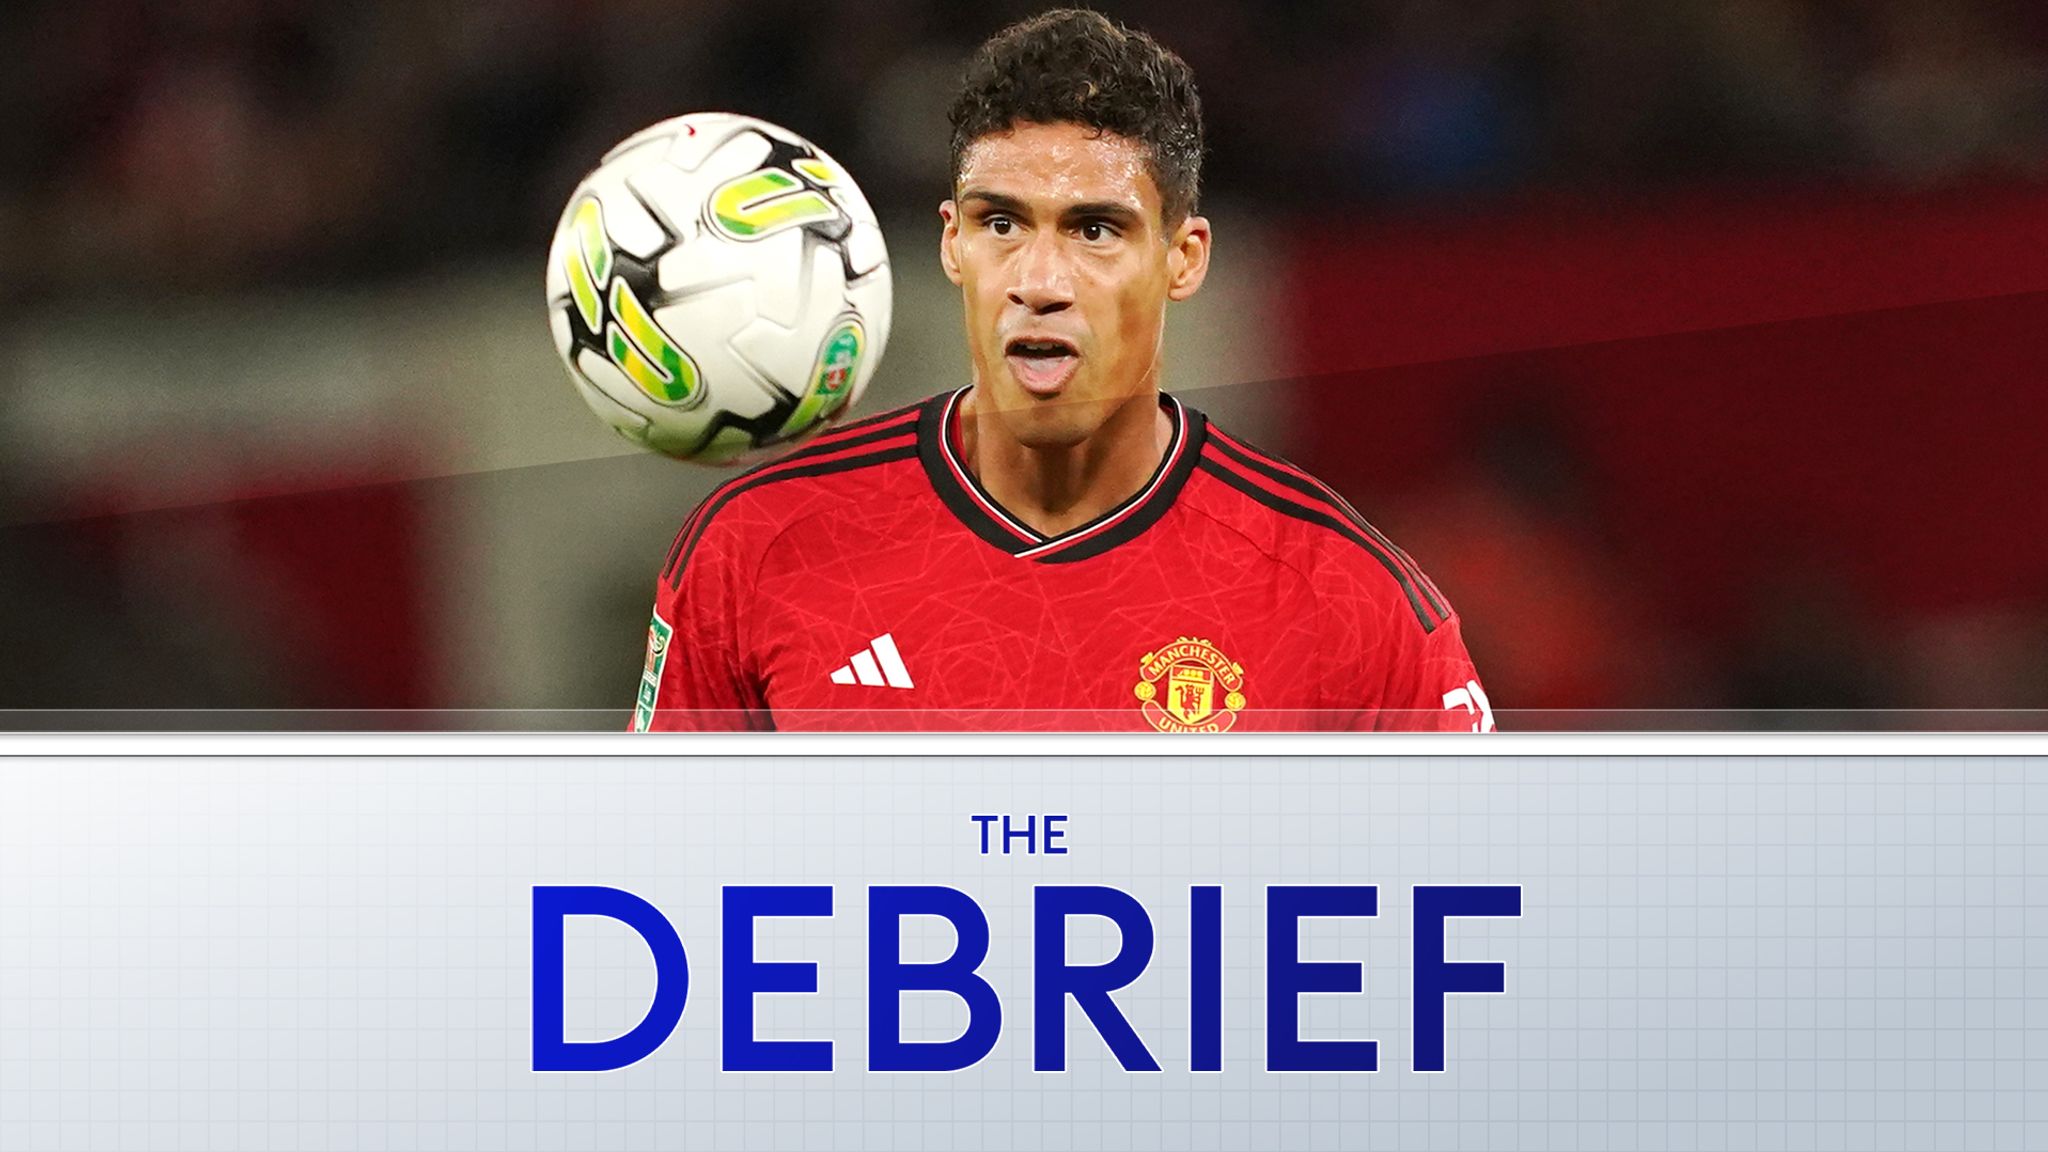 The Debrief: Raphael Varane’s decline, Jordan Clark’s special moment, and a style change in the Football League